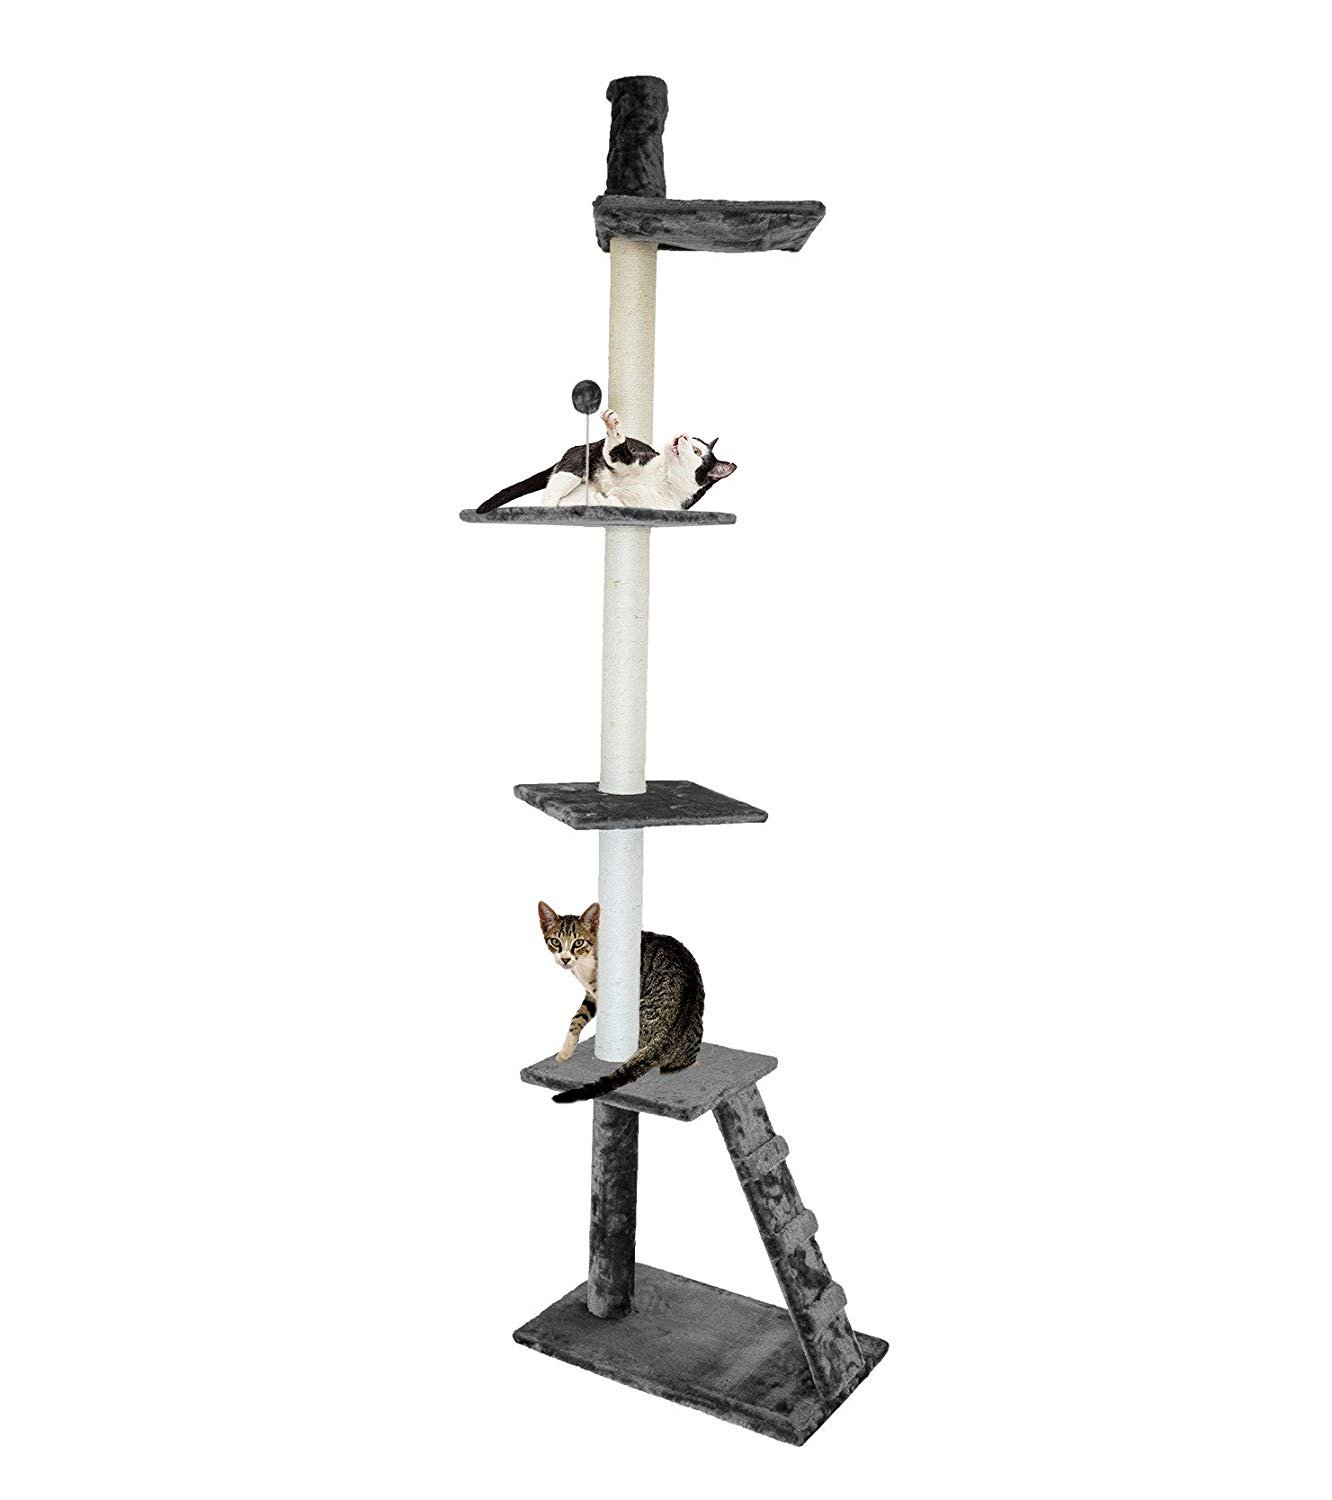 Floor To Ceiling Cat Tree - Love this slimline cat tree with a narrow base & tension pole for stability.